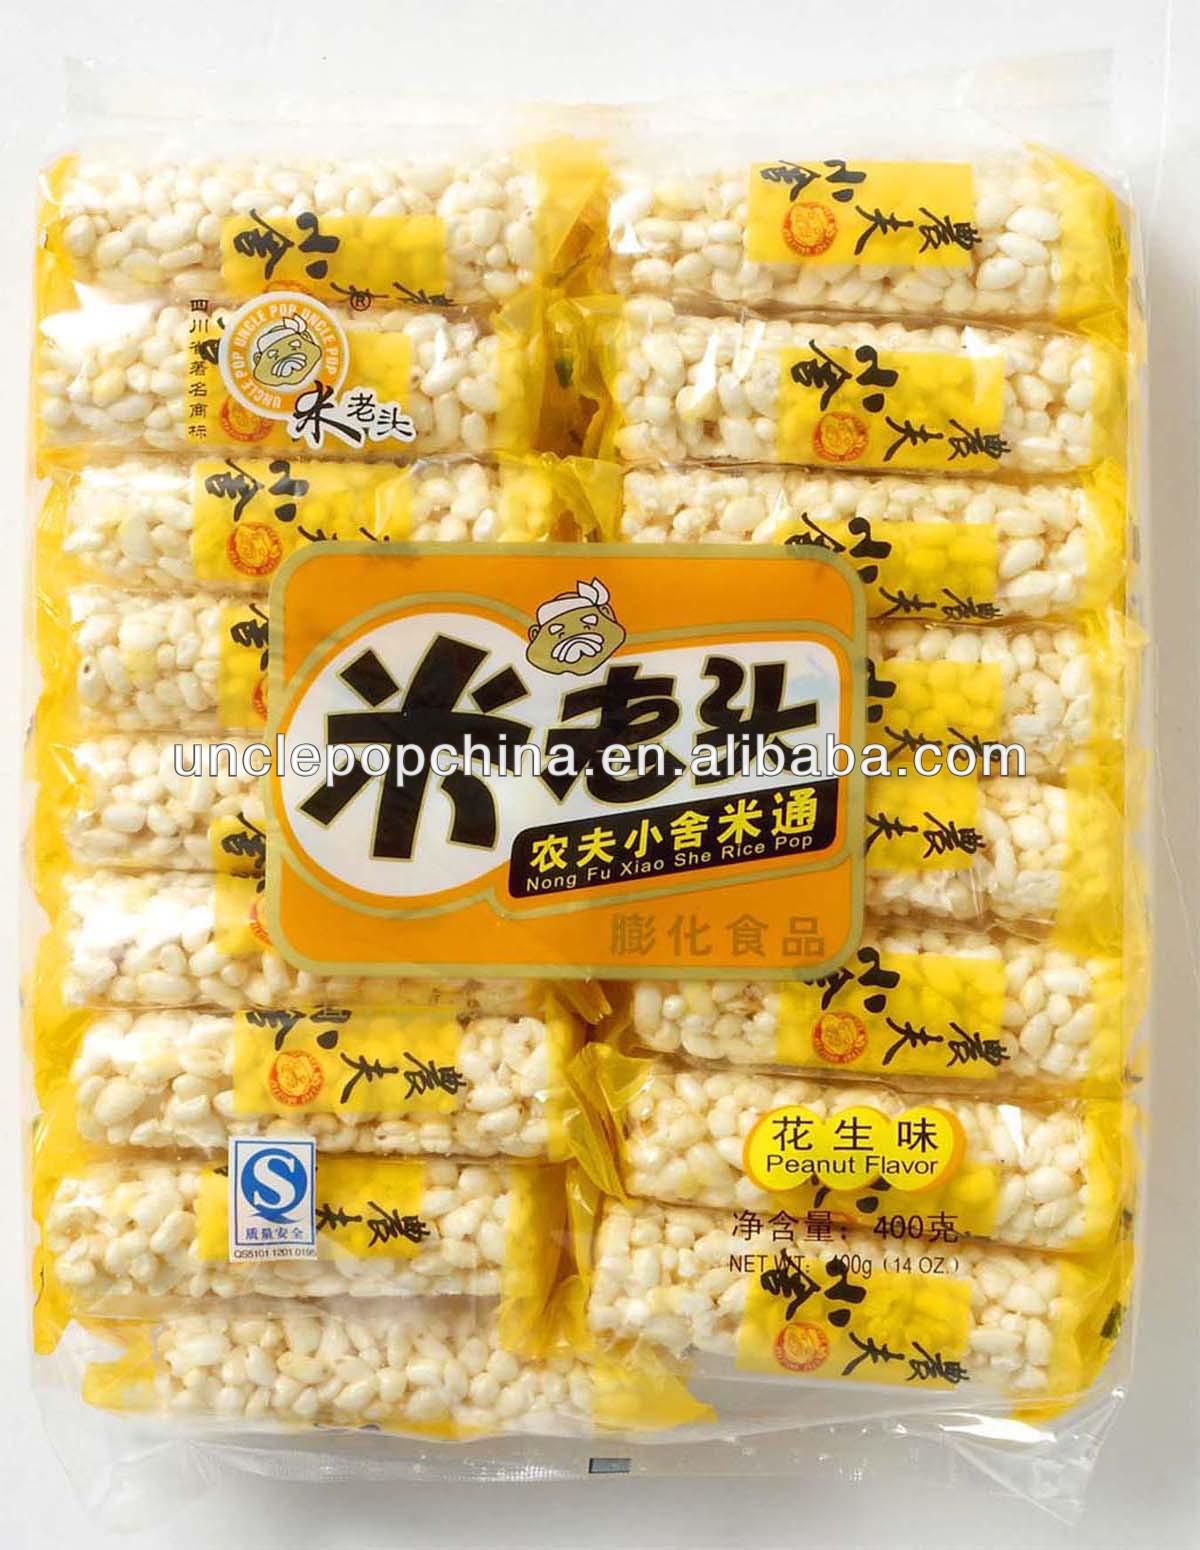 400g peanut flavor puffed rice cracker,China Uncle Pop price supplier ...